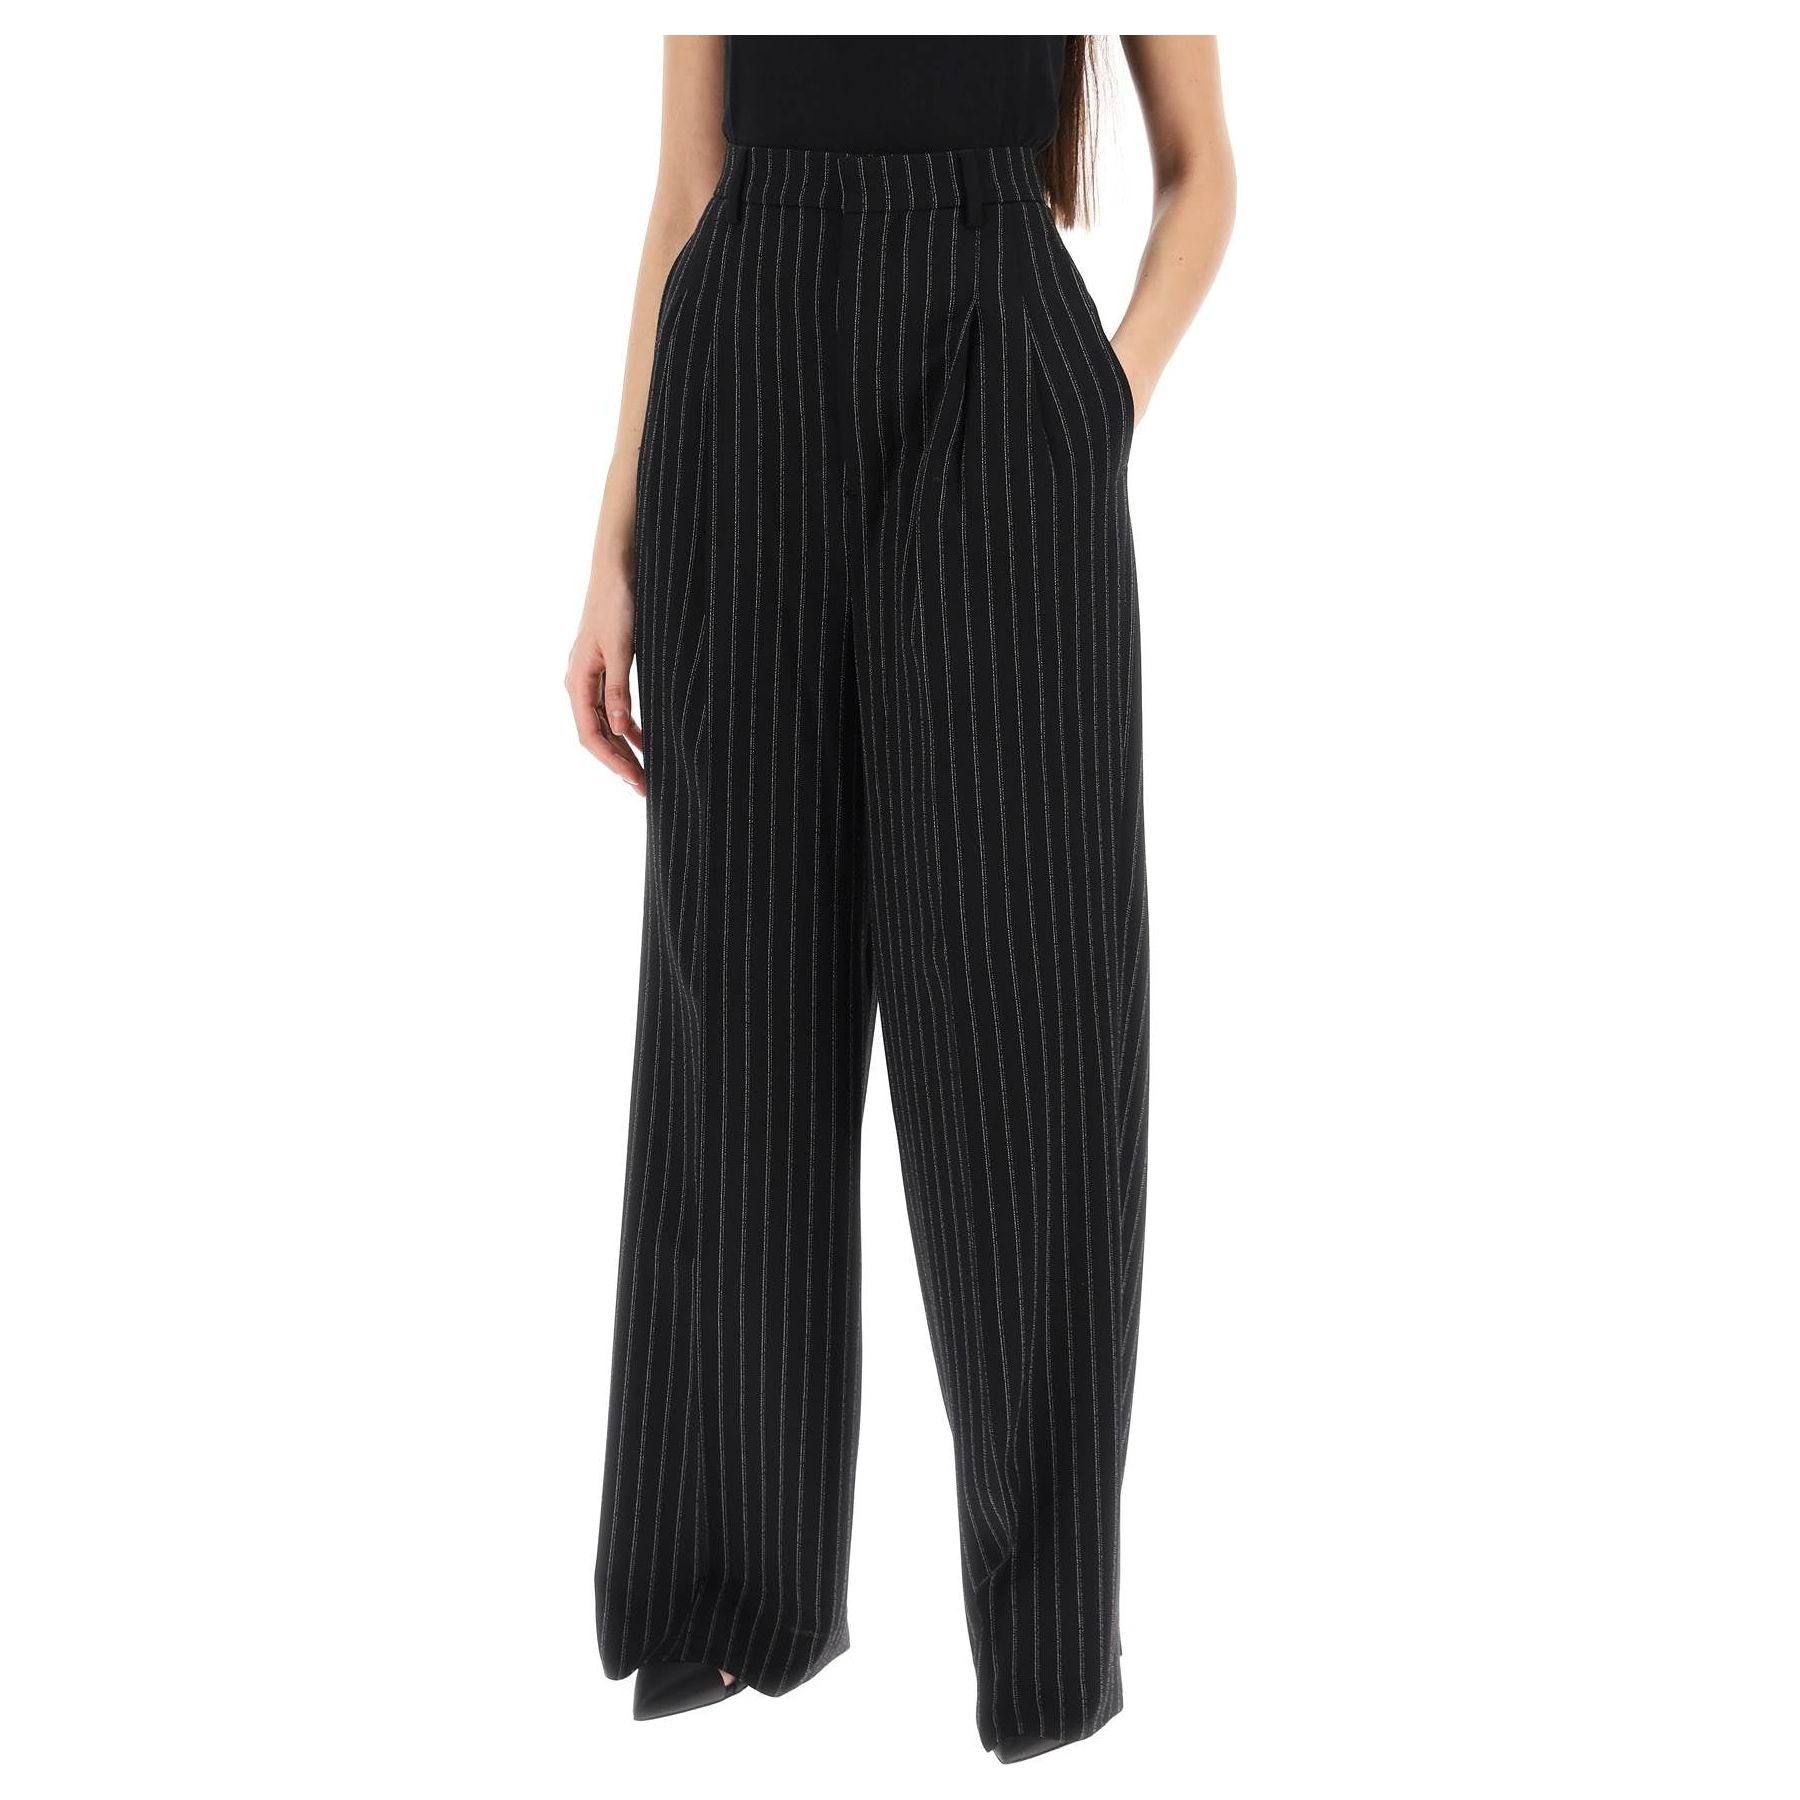 Pinstriped Wool Trousers